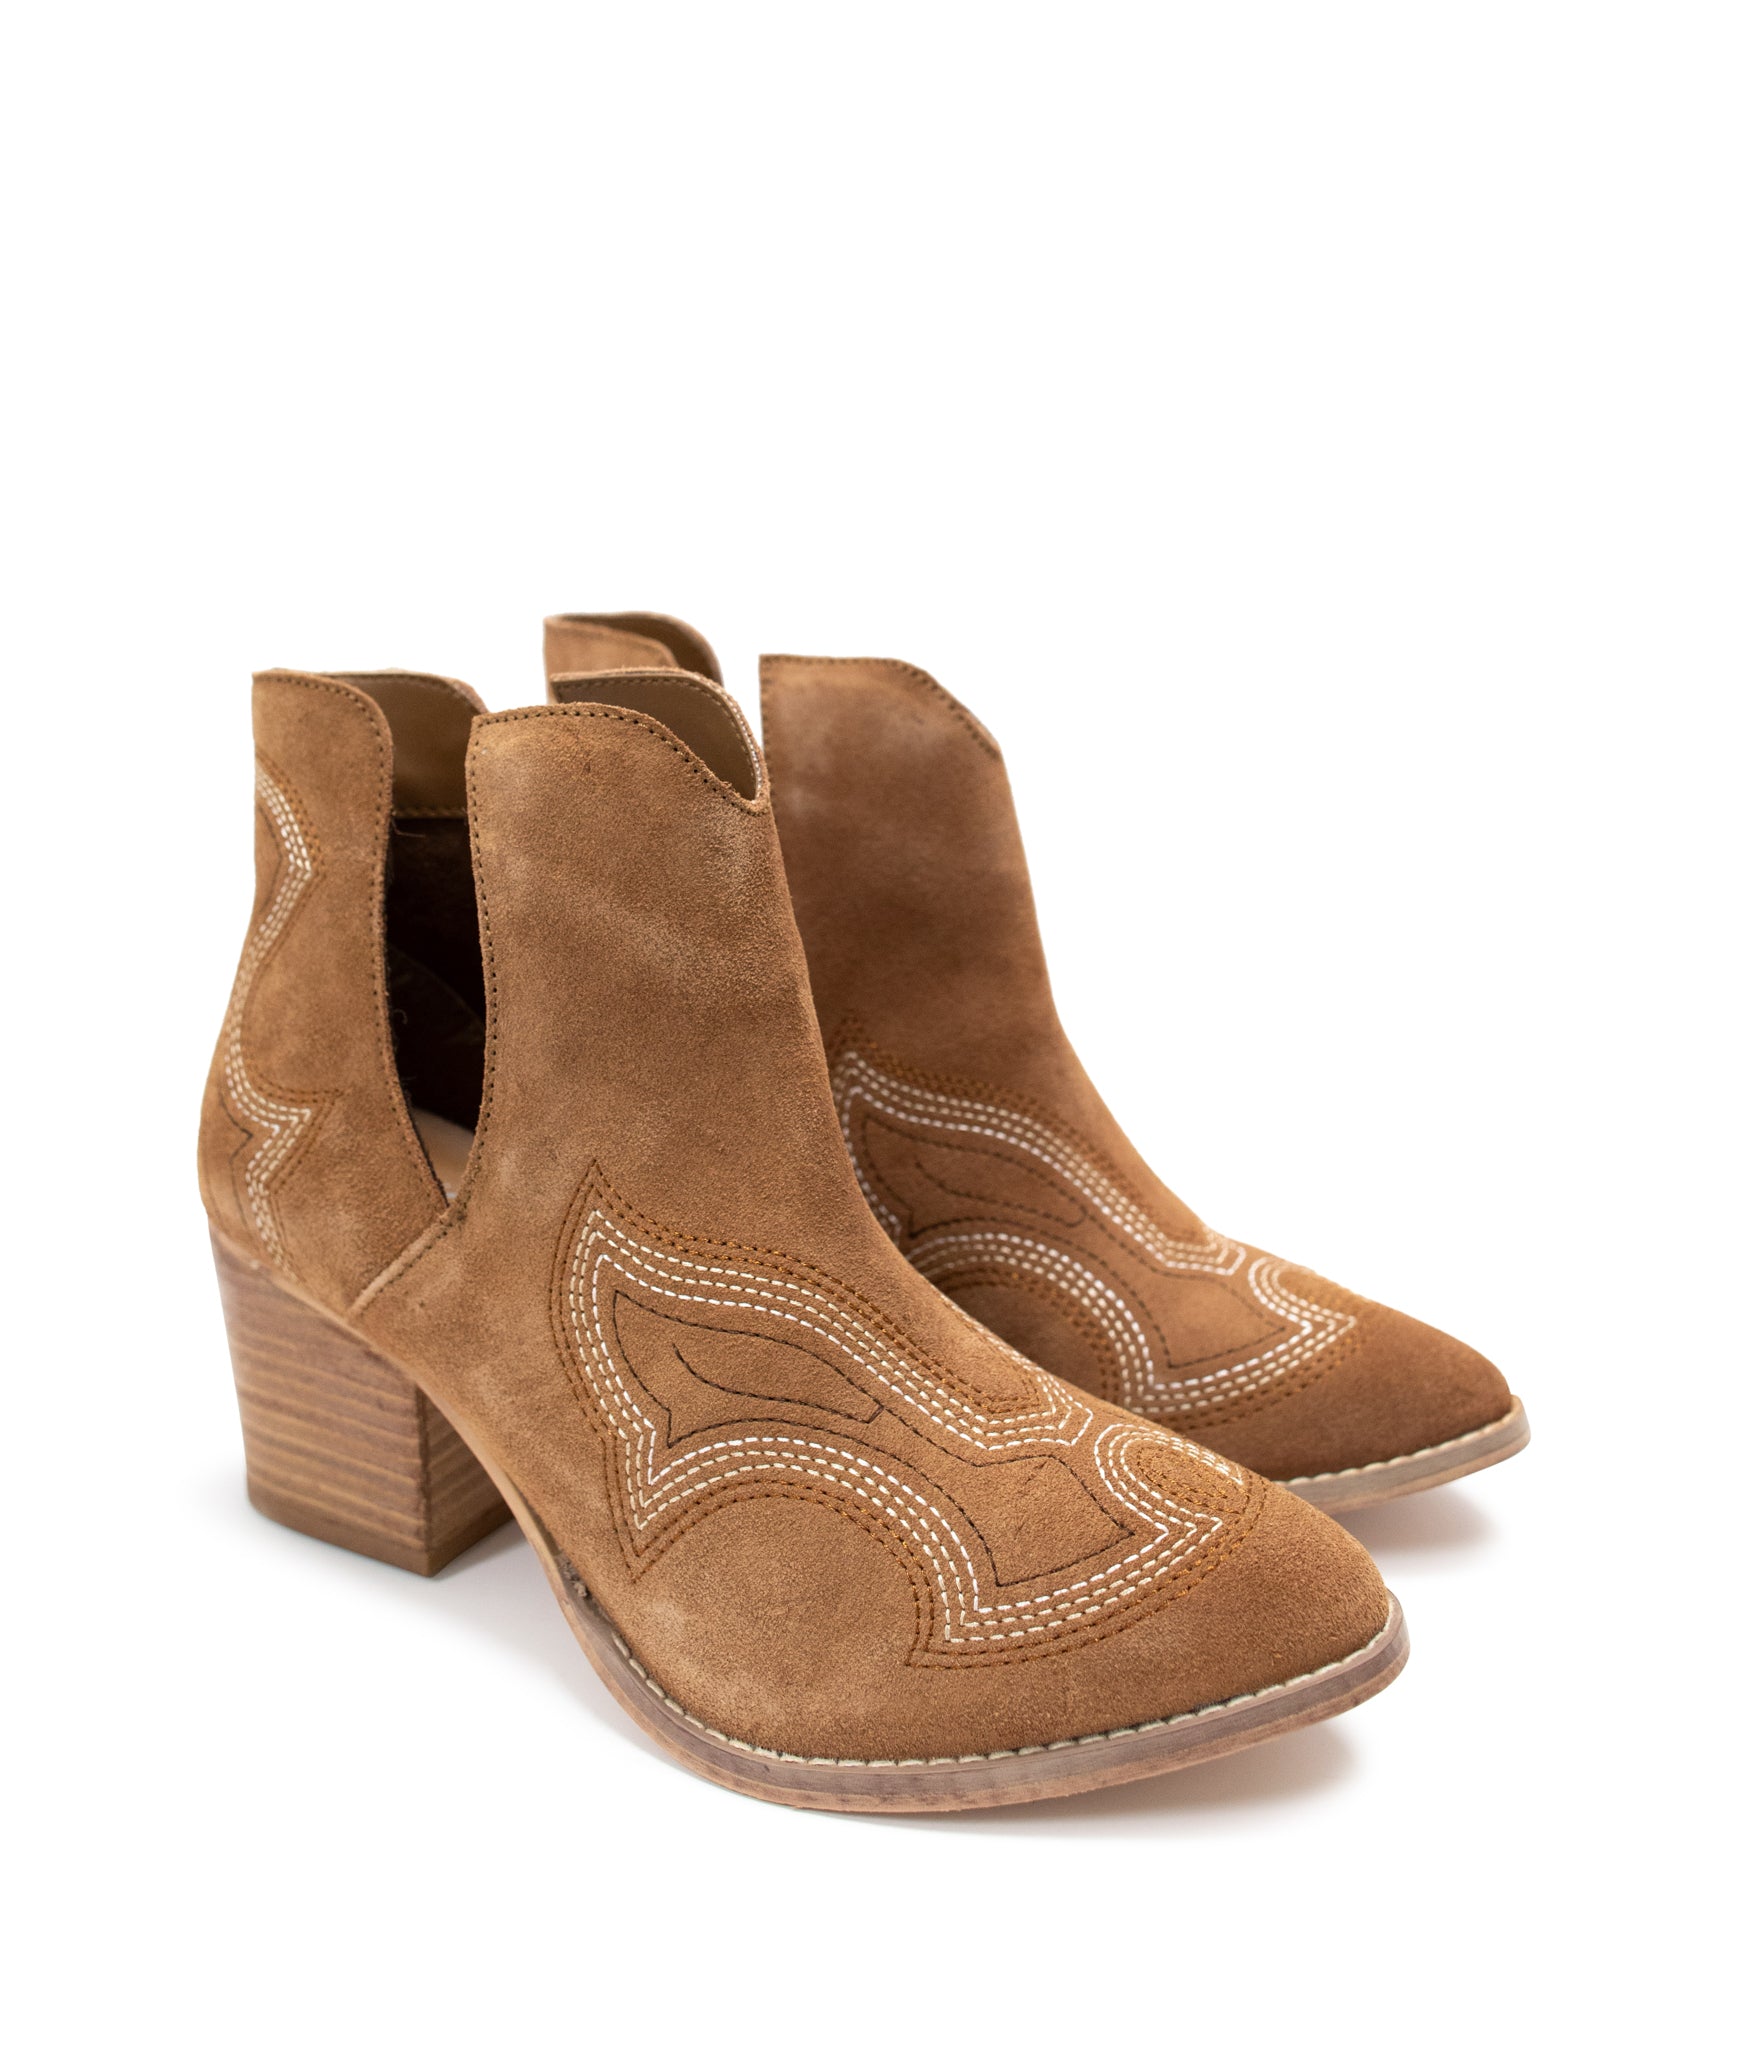 Journee Ankle Boots in Tan